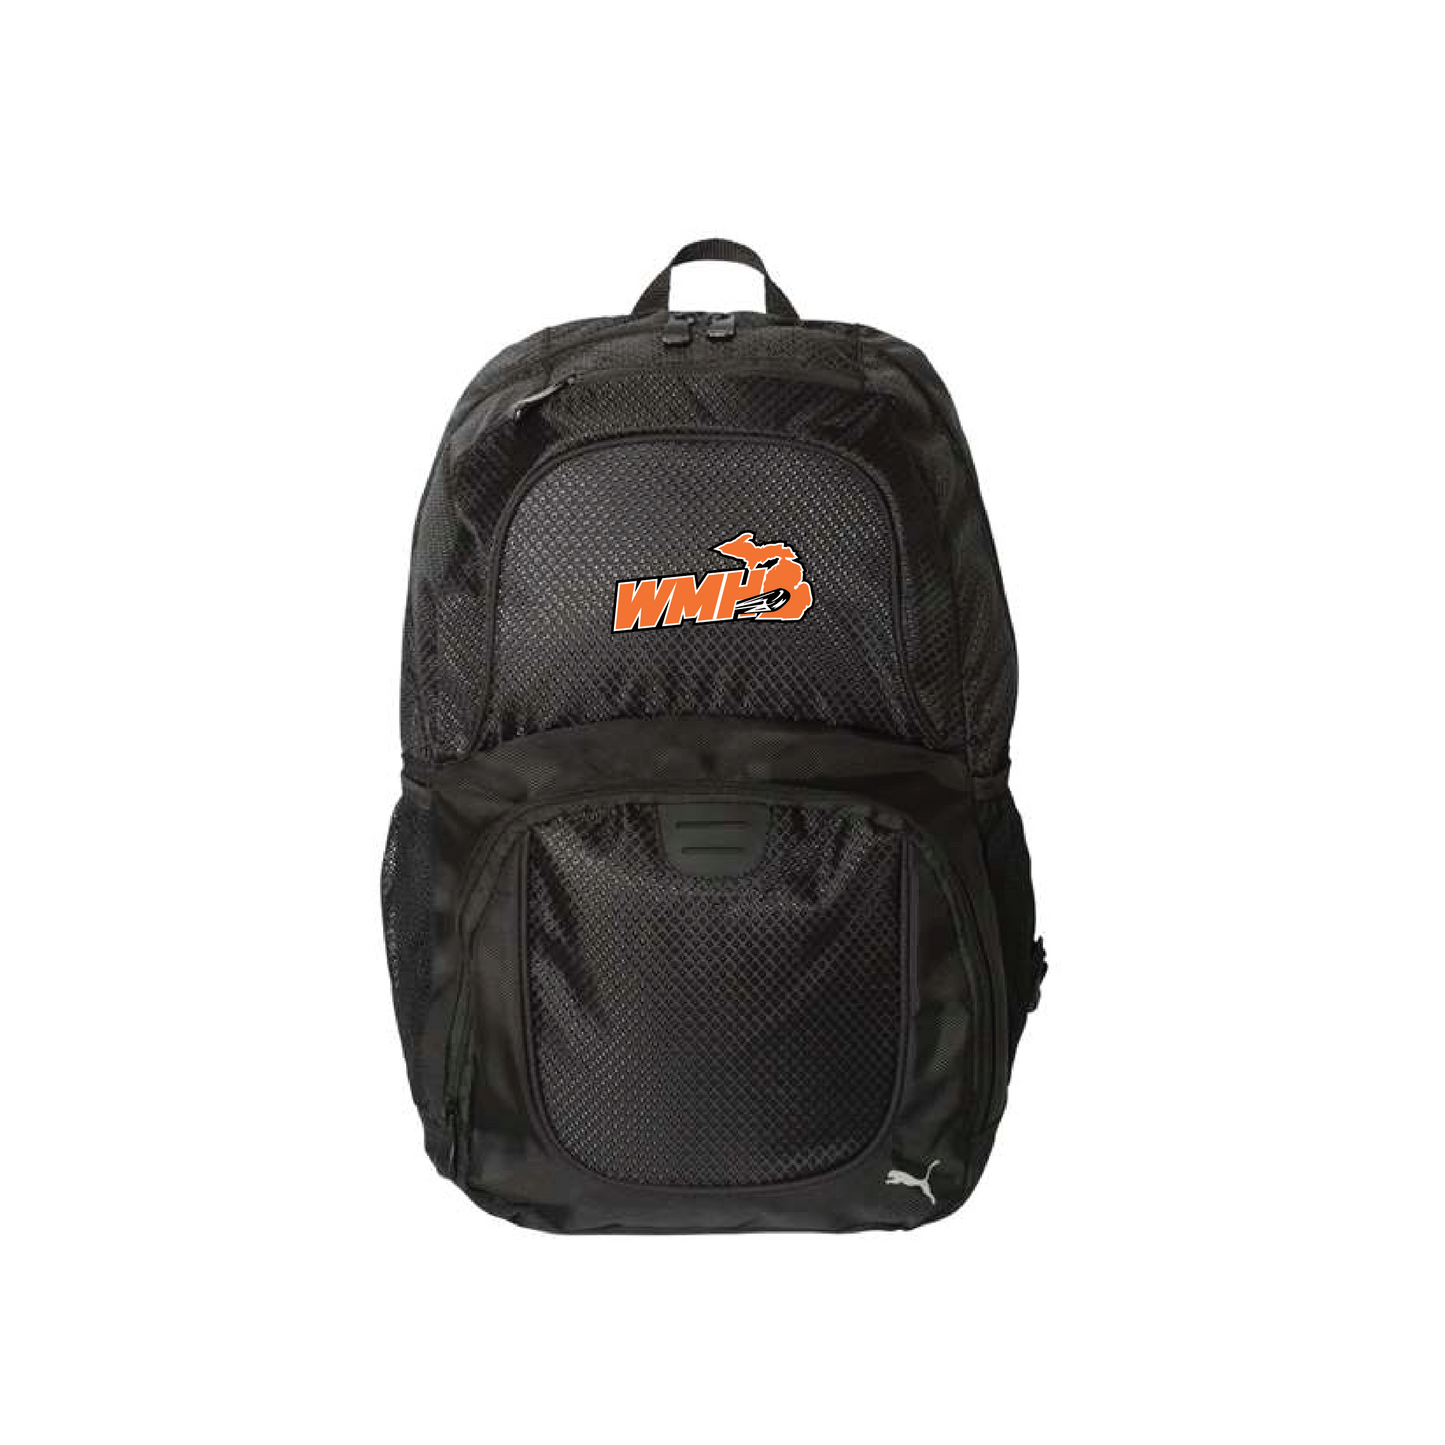 WMHO Backpack